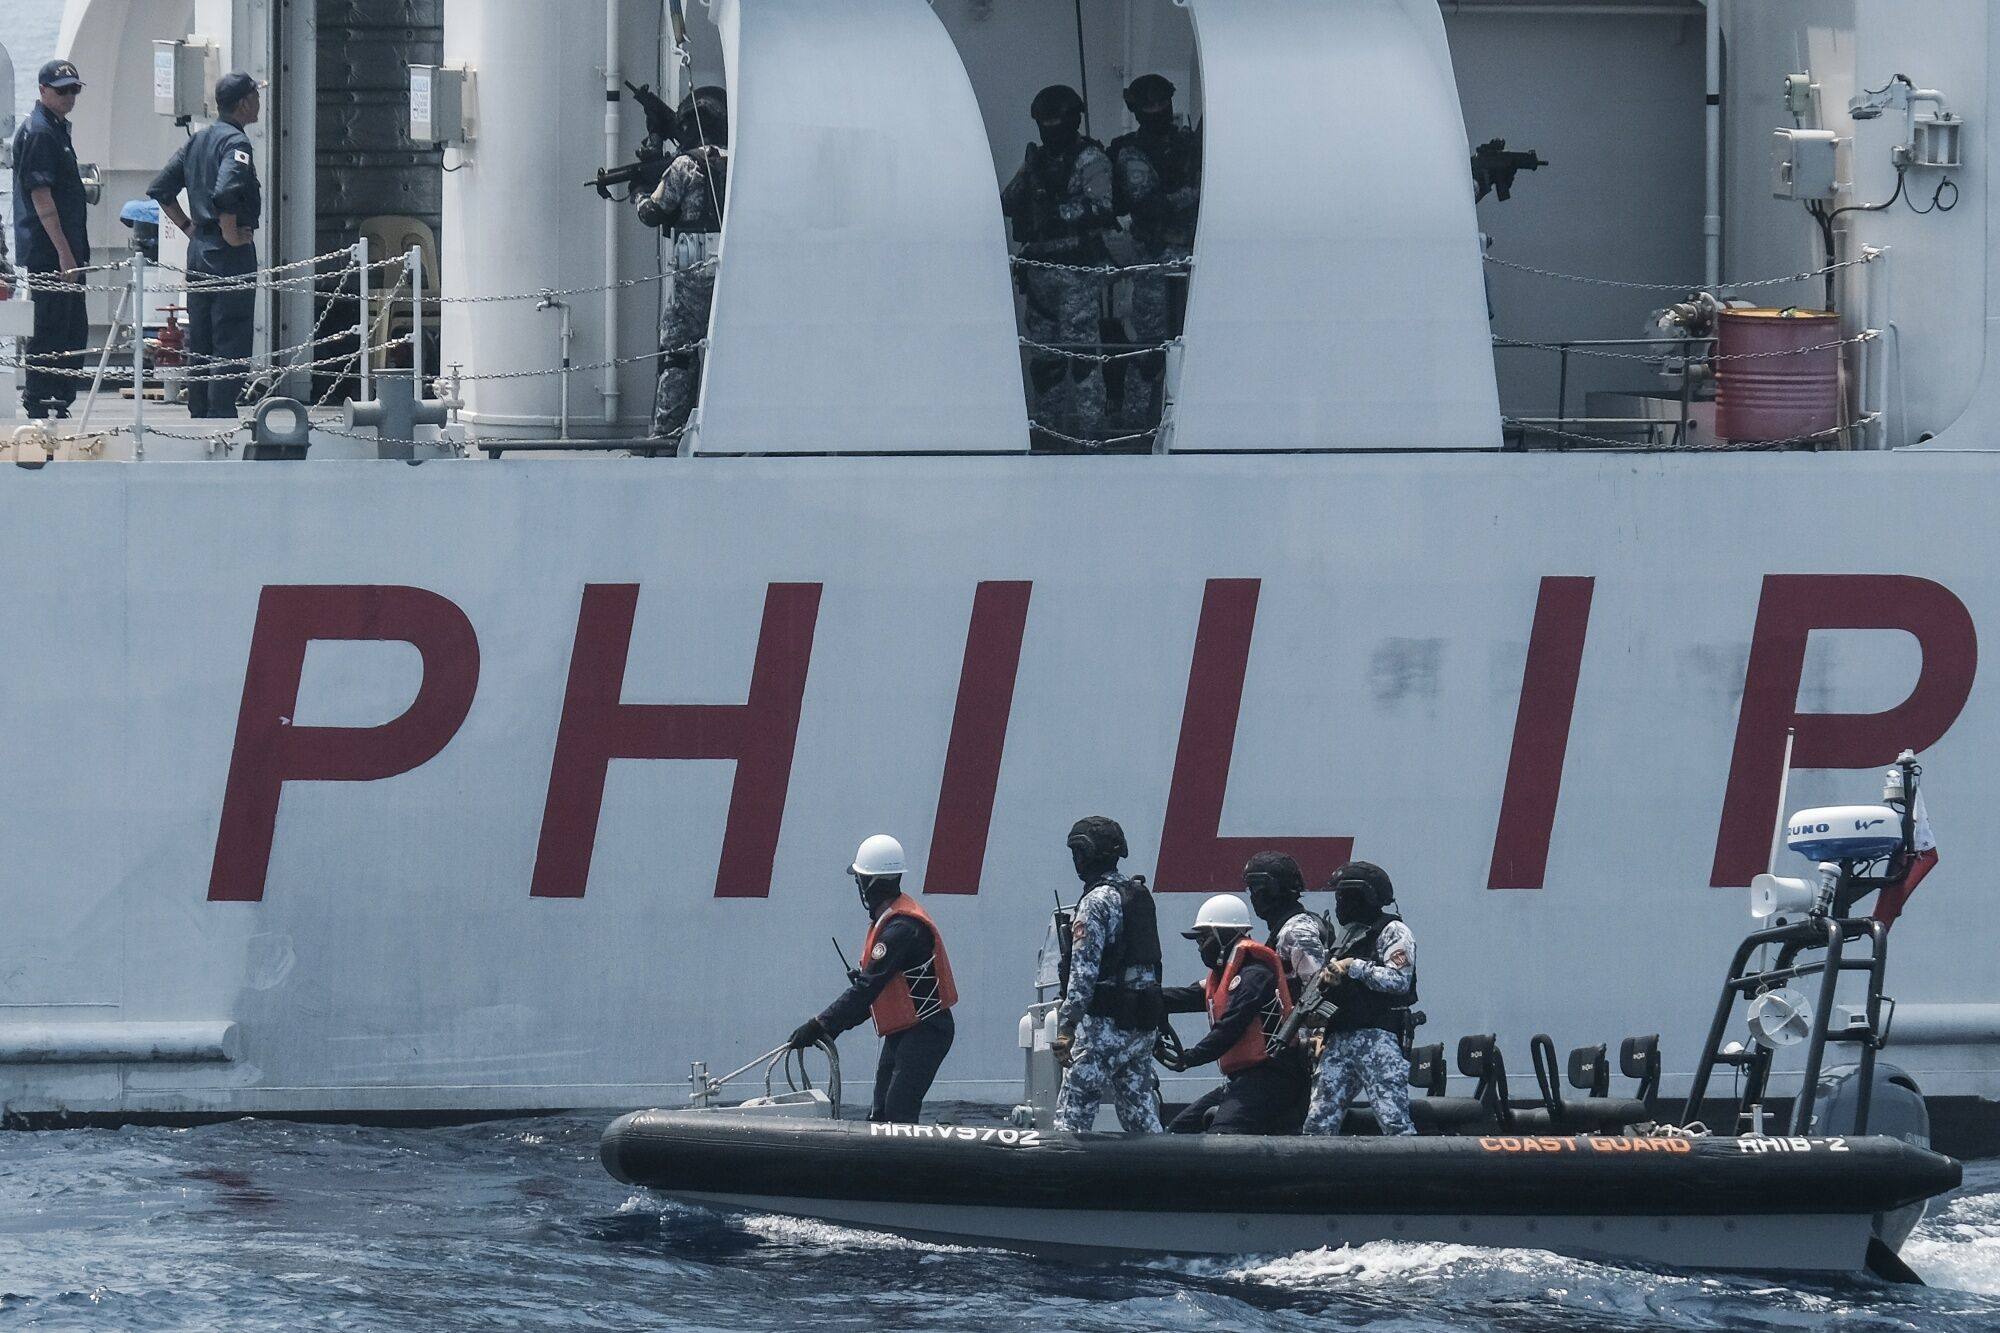 Members of the Philippine Coast Guard take part in a joint maritime exercise with coastguards from Japan and the US off the coast of Mariveles, Bataan province, in the Philippines, on June 6. Photo: Bloomberg